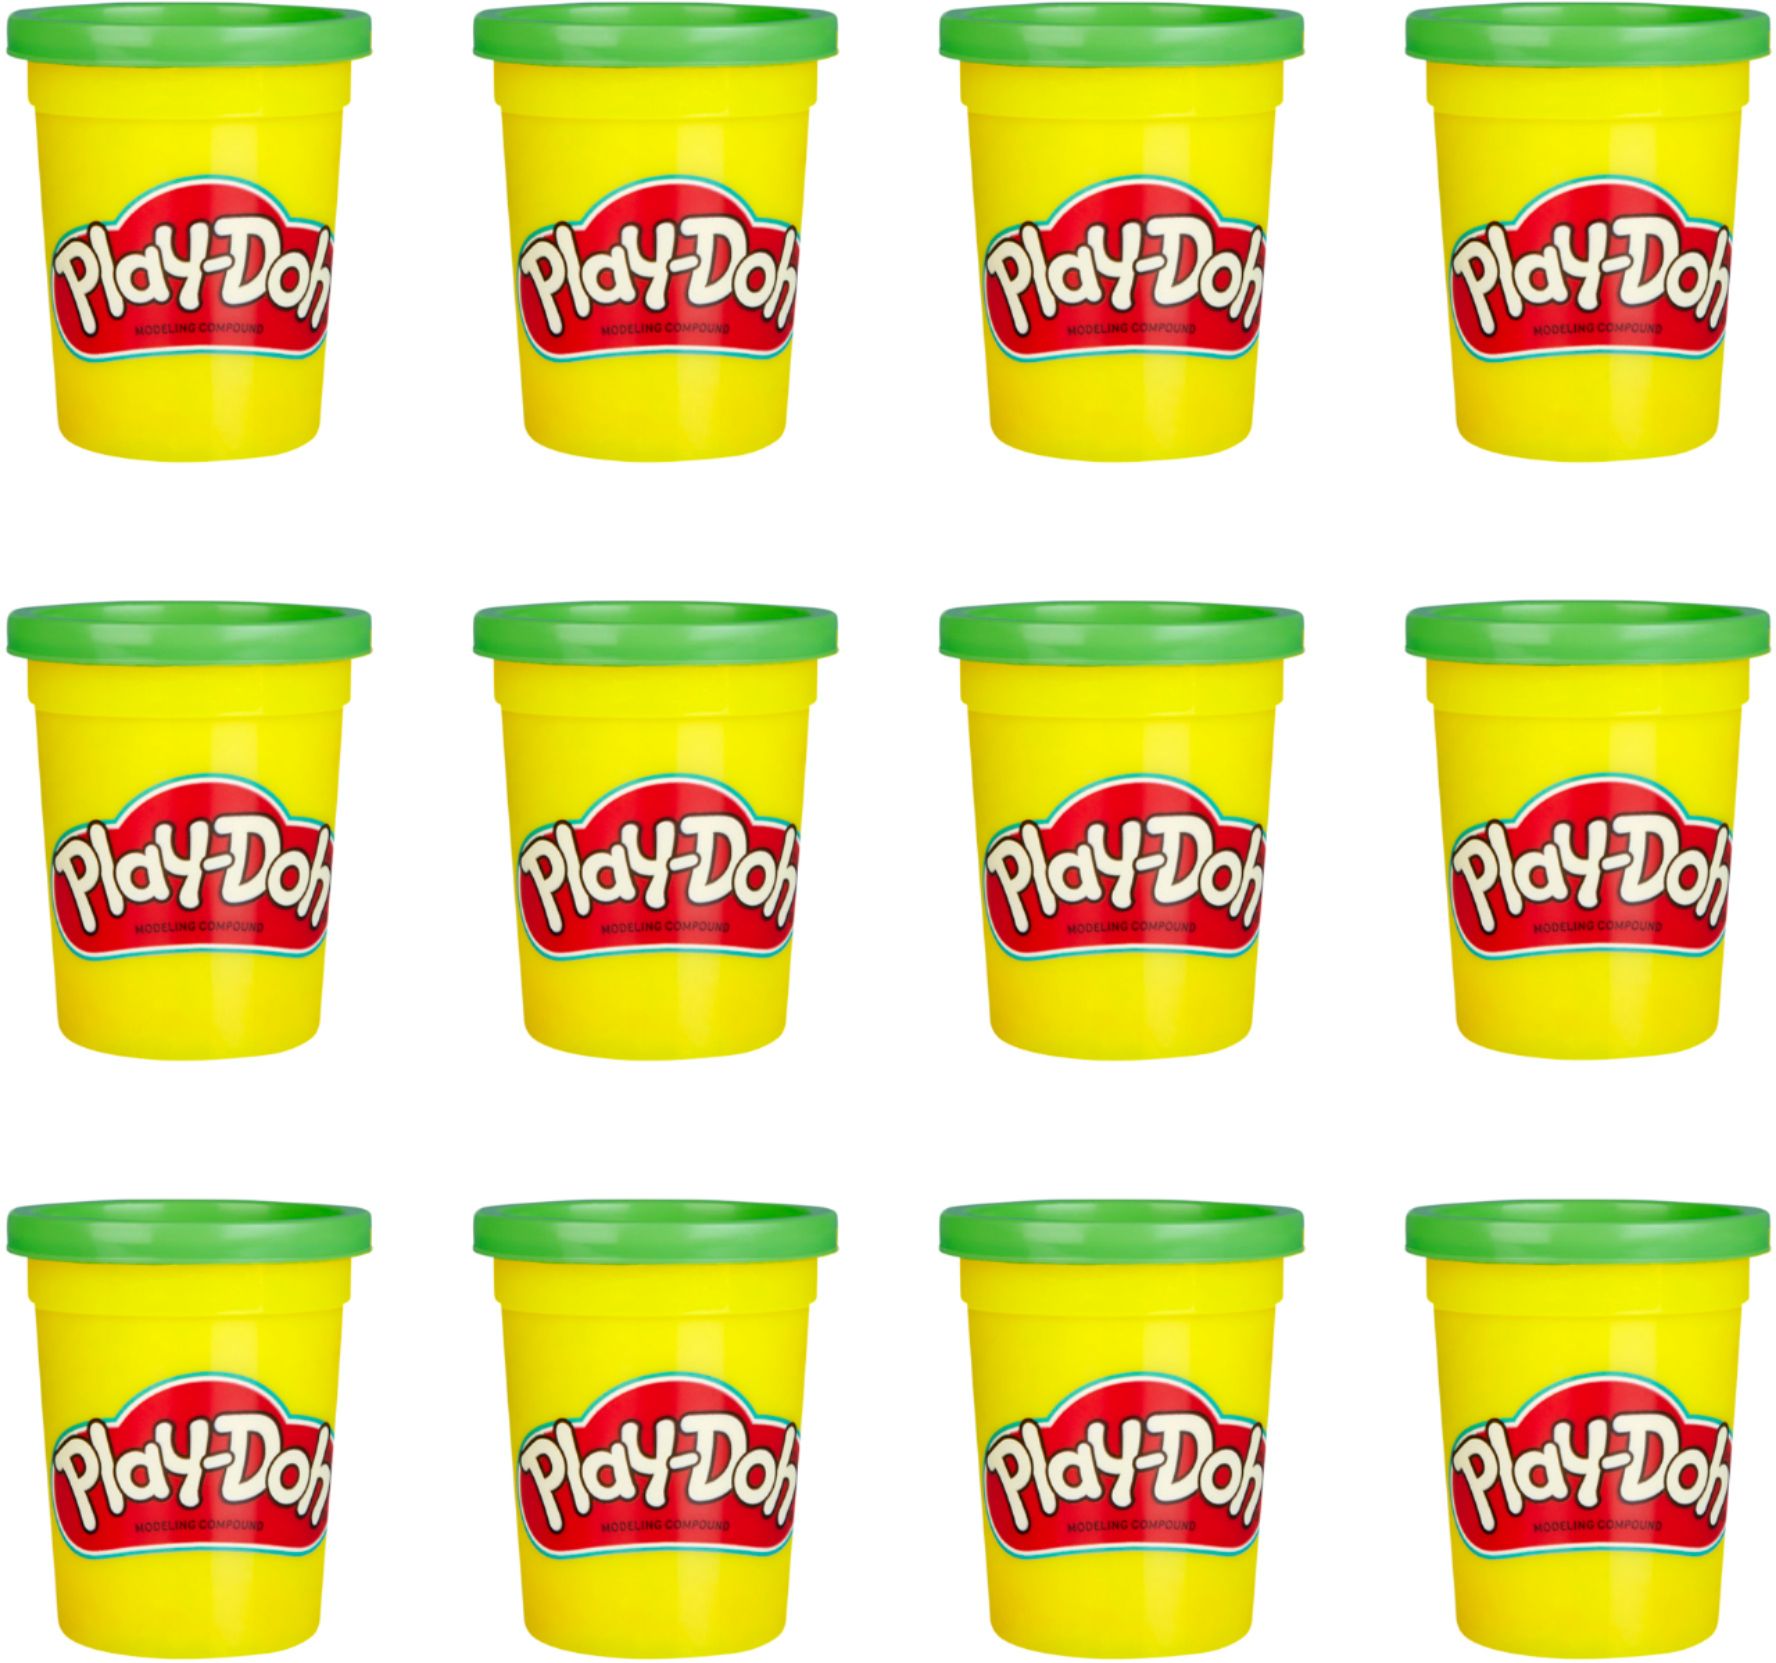 Best Buy: Play-Doh Bulk 12-Pack of Non-Toxic Modeling Compound, 4-Ounce  Cans Green E4828